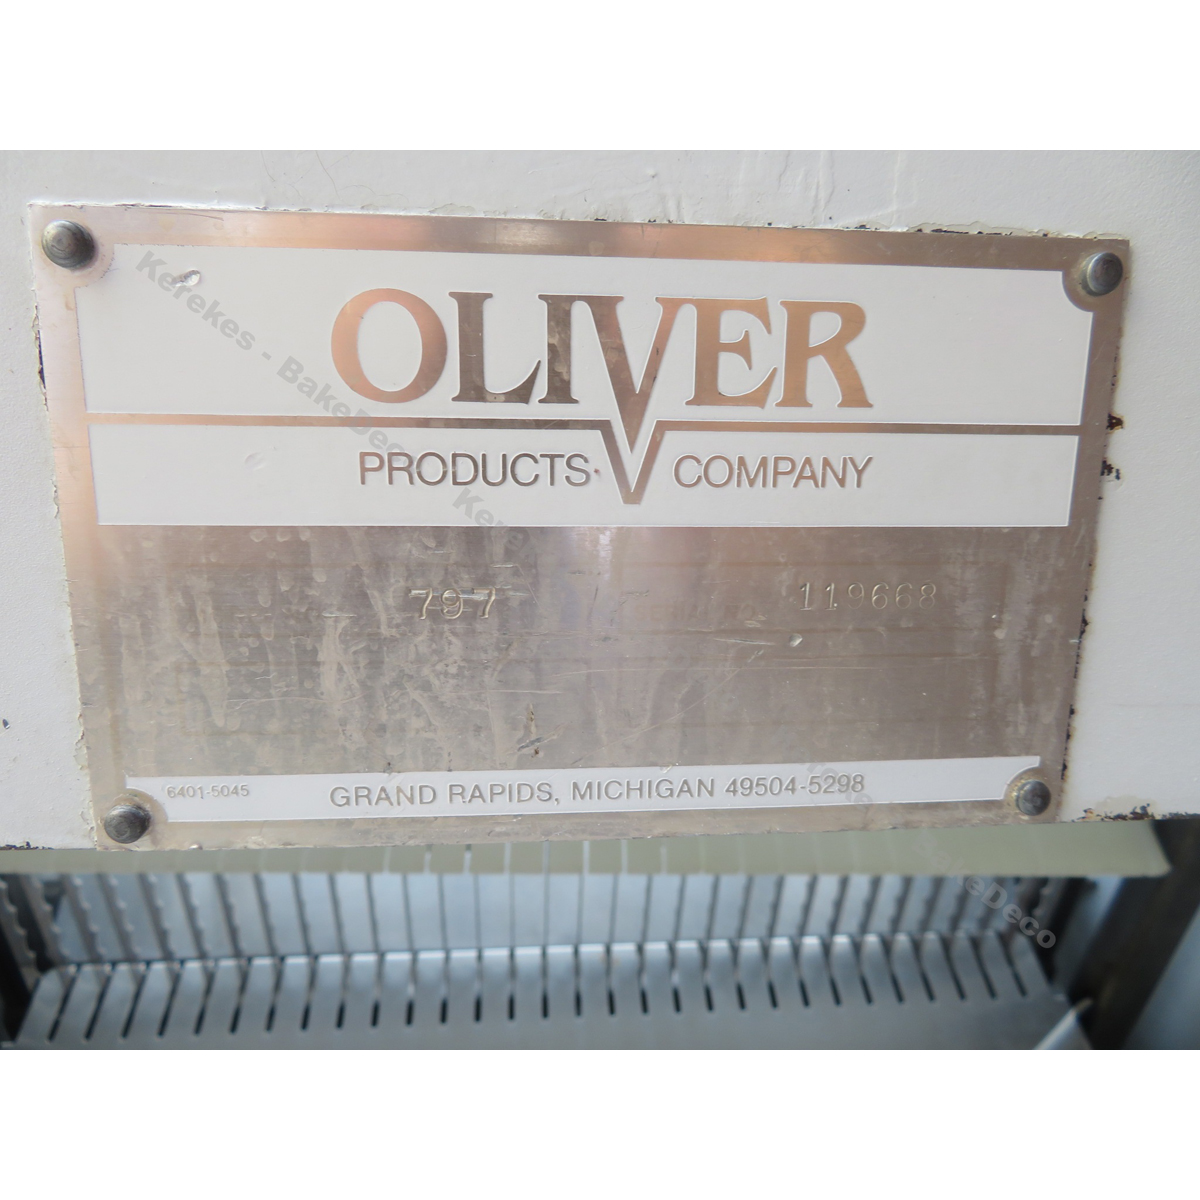 Oliver 797 Gravity Feed Bread Slicer  W/ 1197 Swing-Away Bagger , 1/2" Slices, Used Great Condition image 4